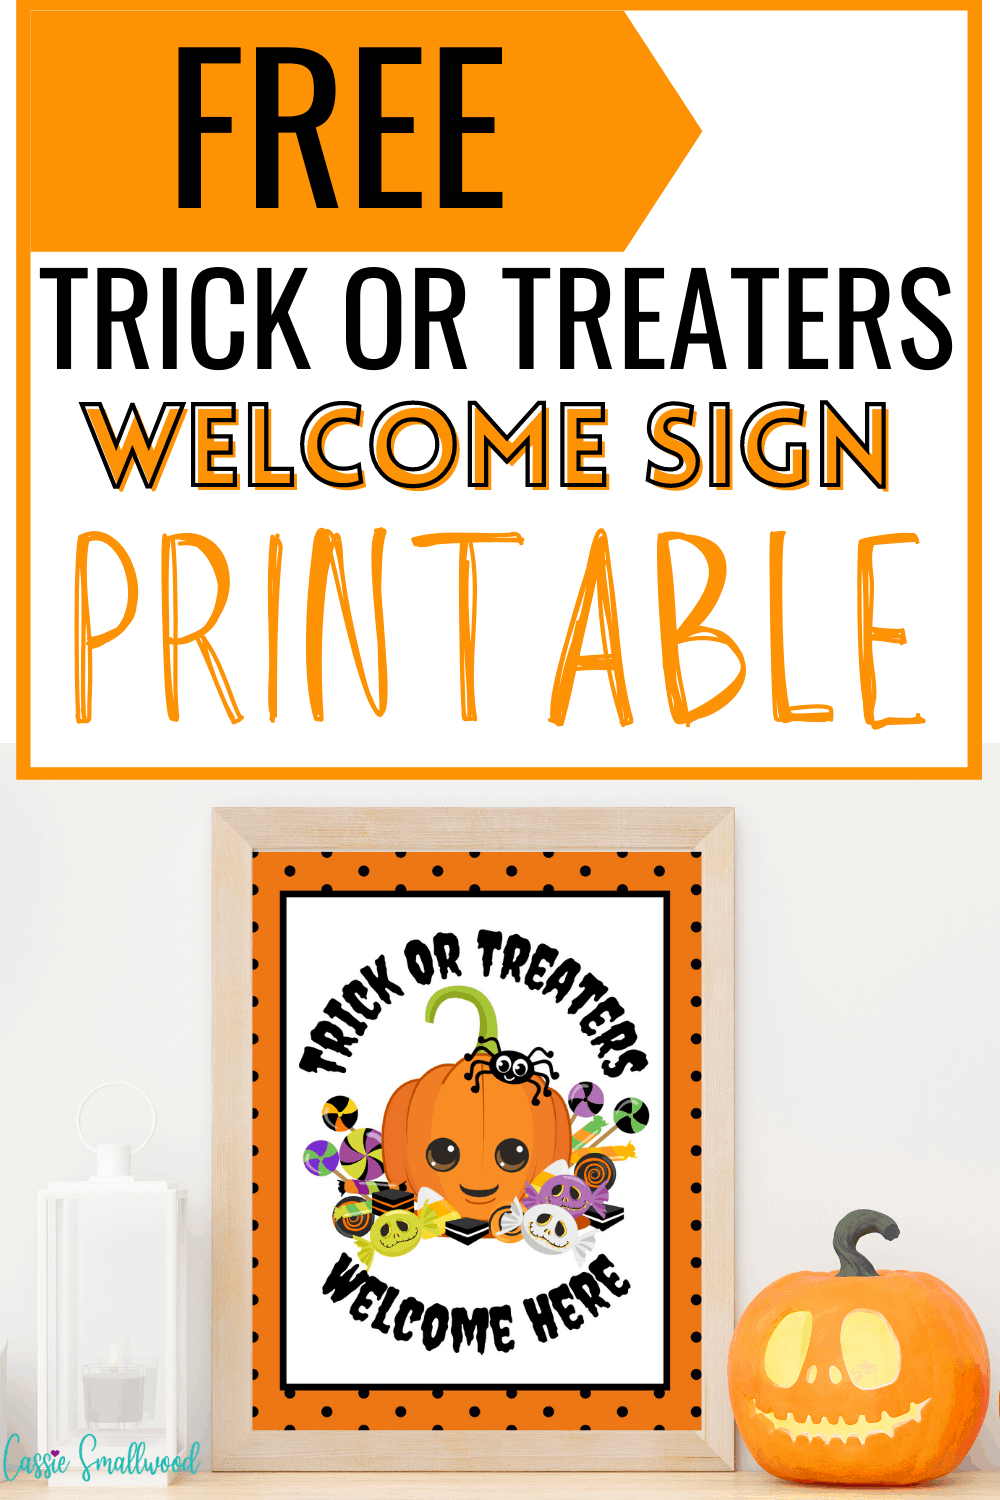 Free trick or treaters welcome sign printable